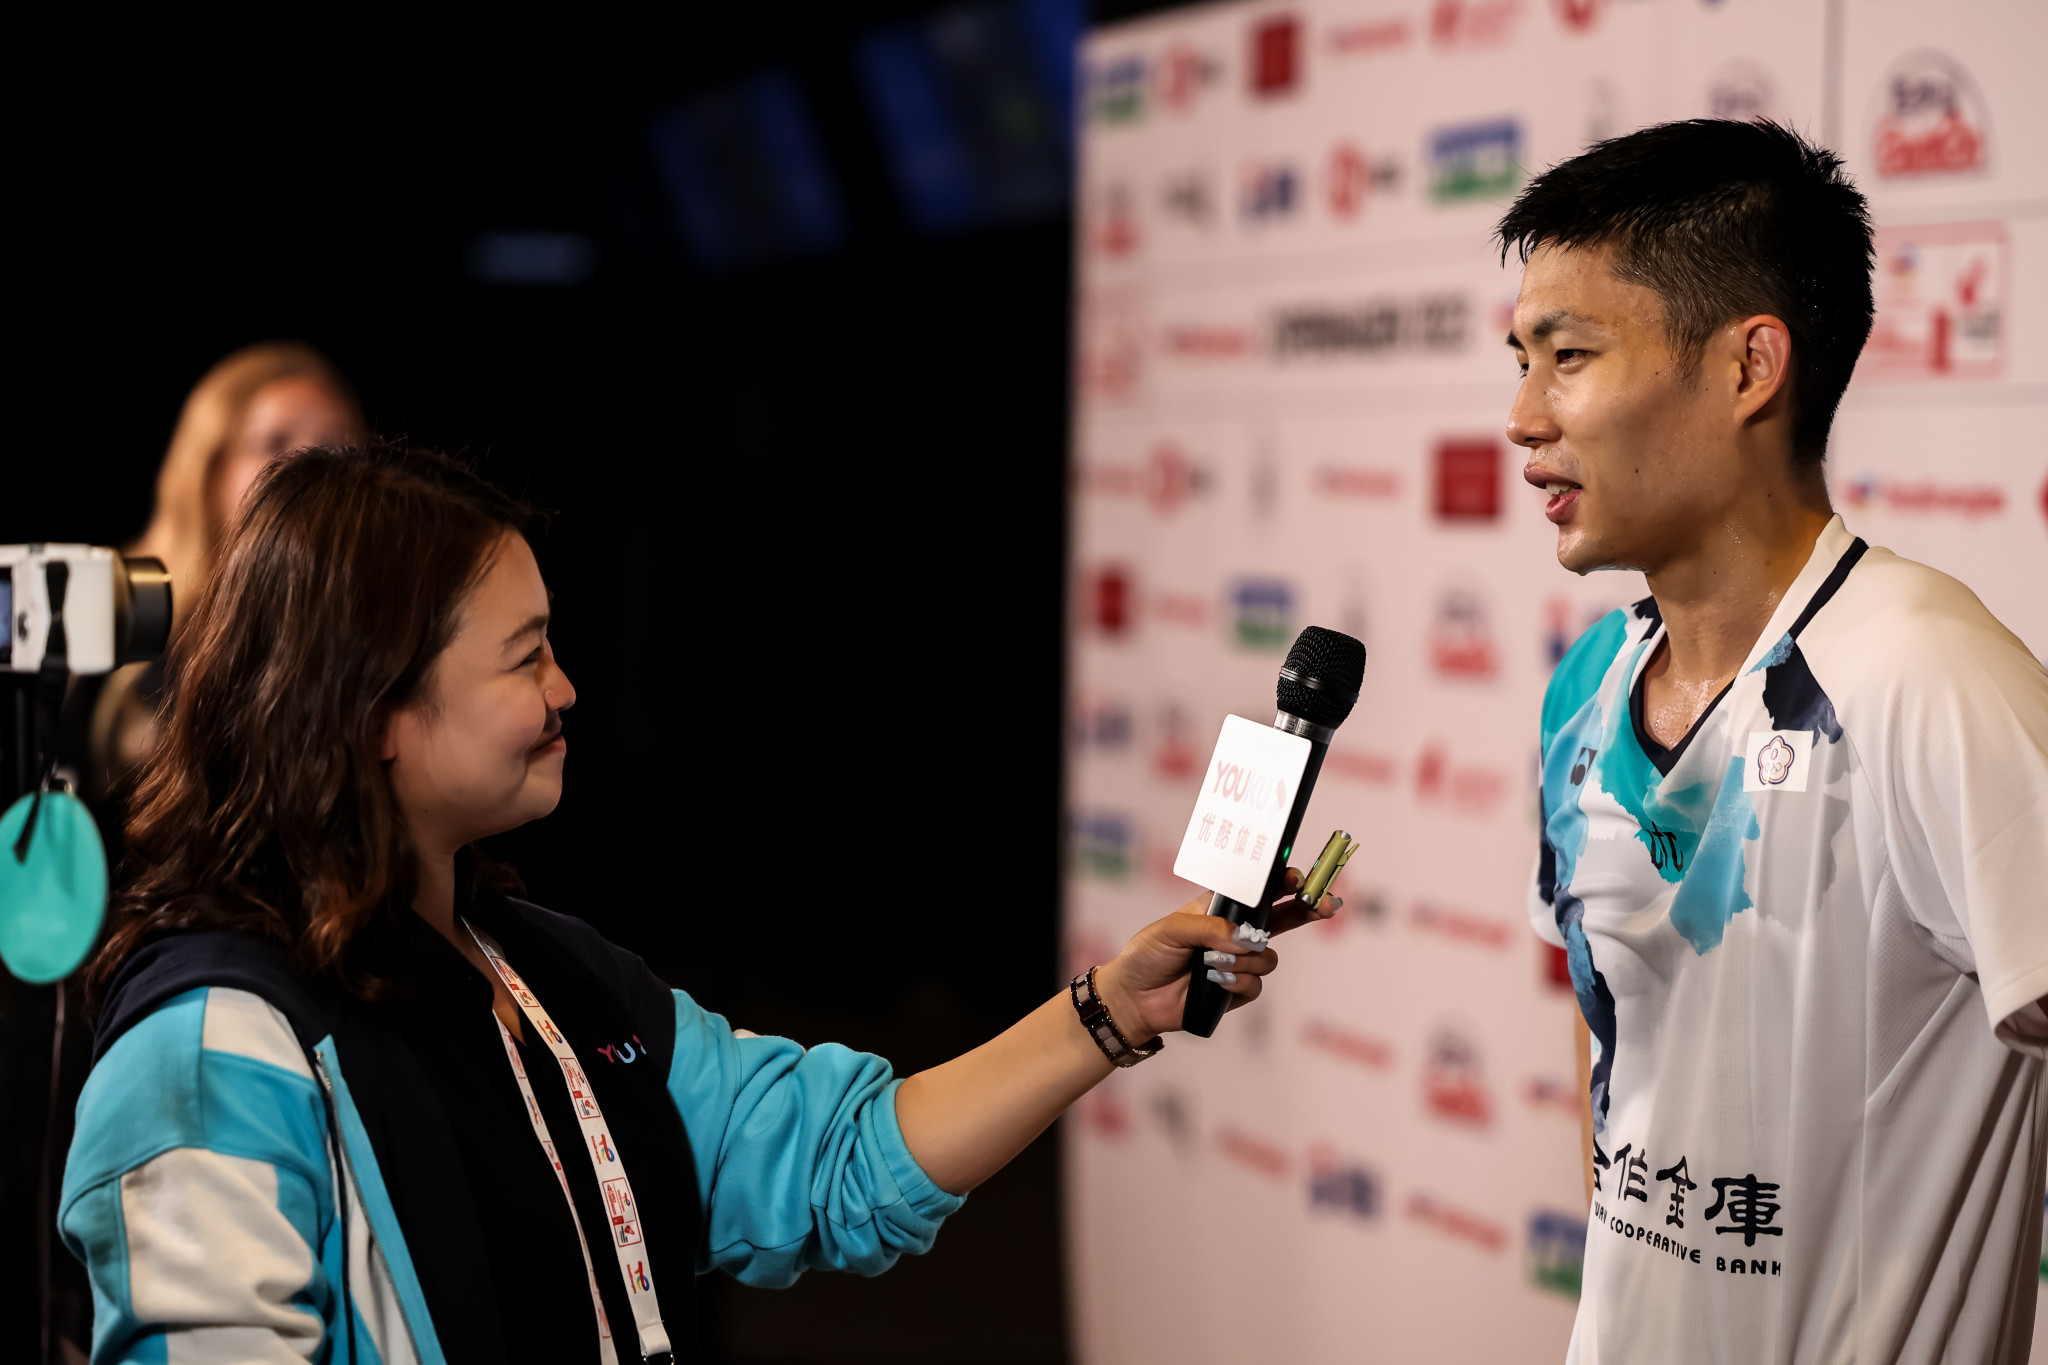 International media were out in force to cover the BWF World Championships ©Badmintonphoto